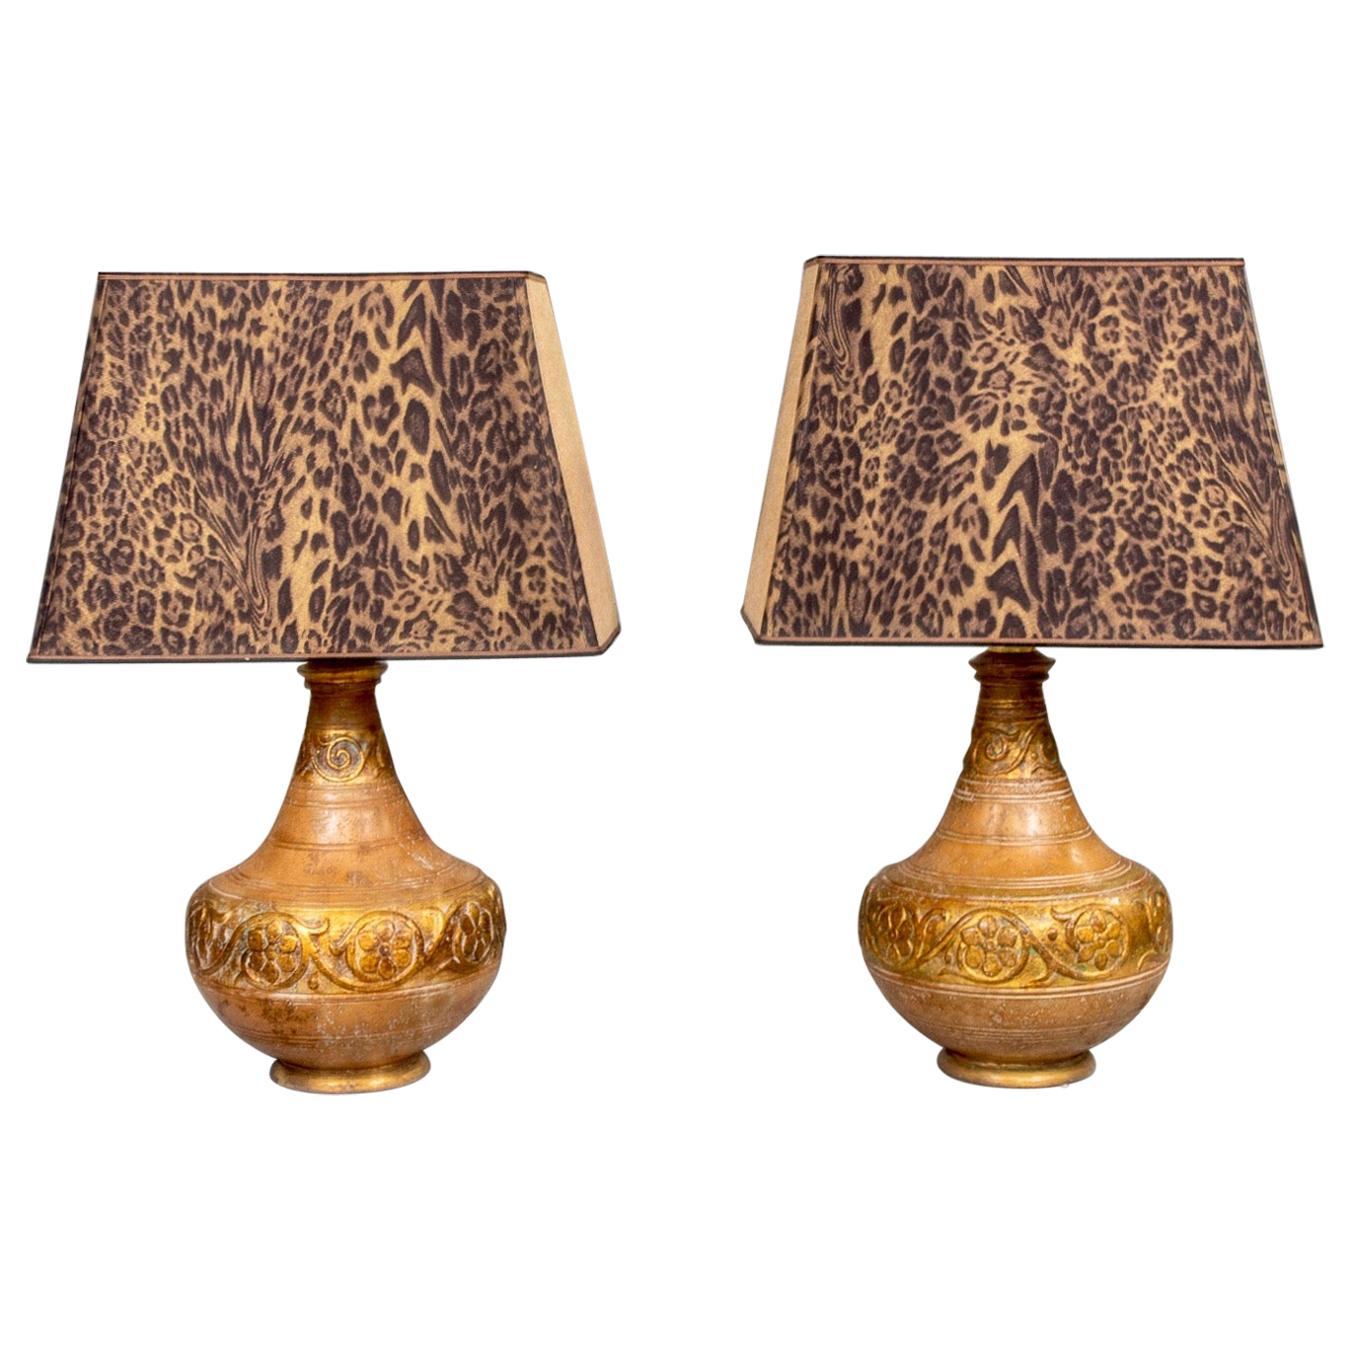 Pair of Italian Midcentury Ceramic Lamps with Leopard Print Shades